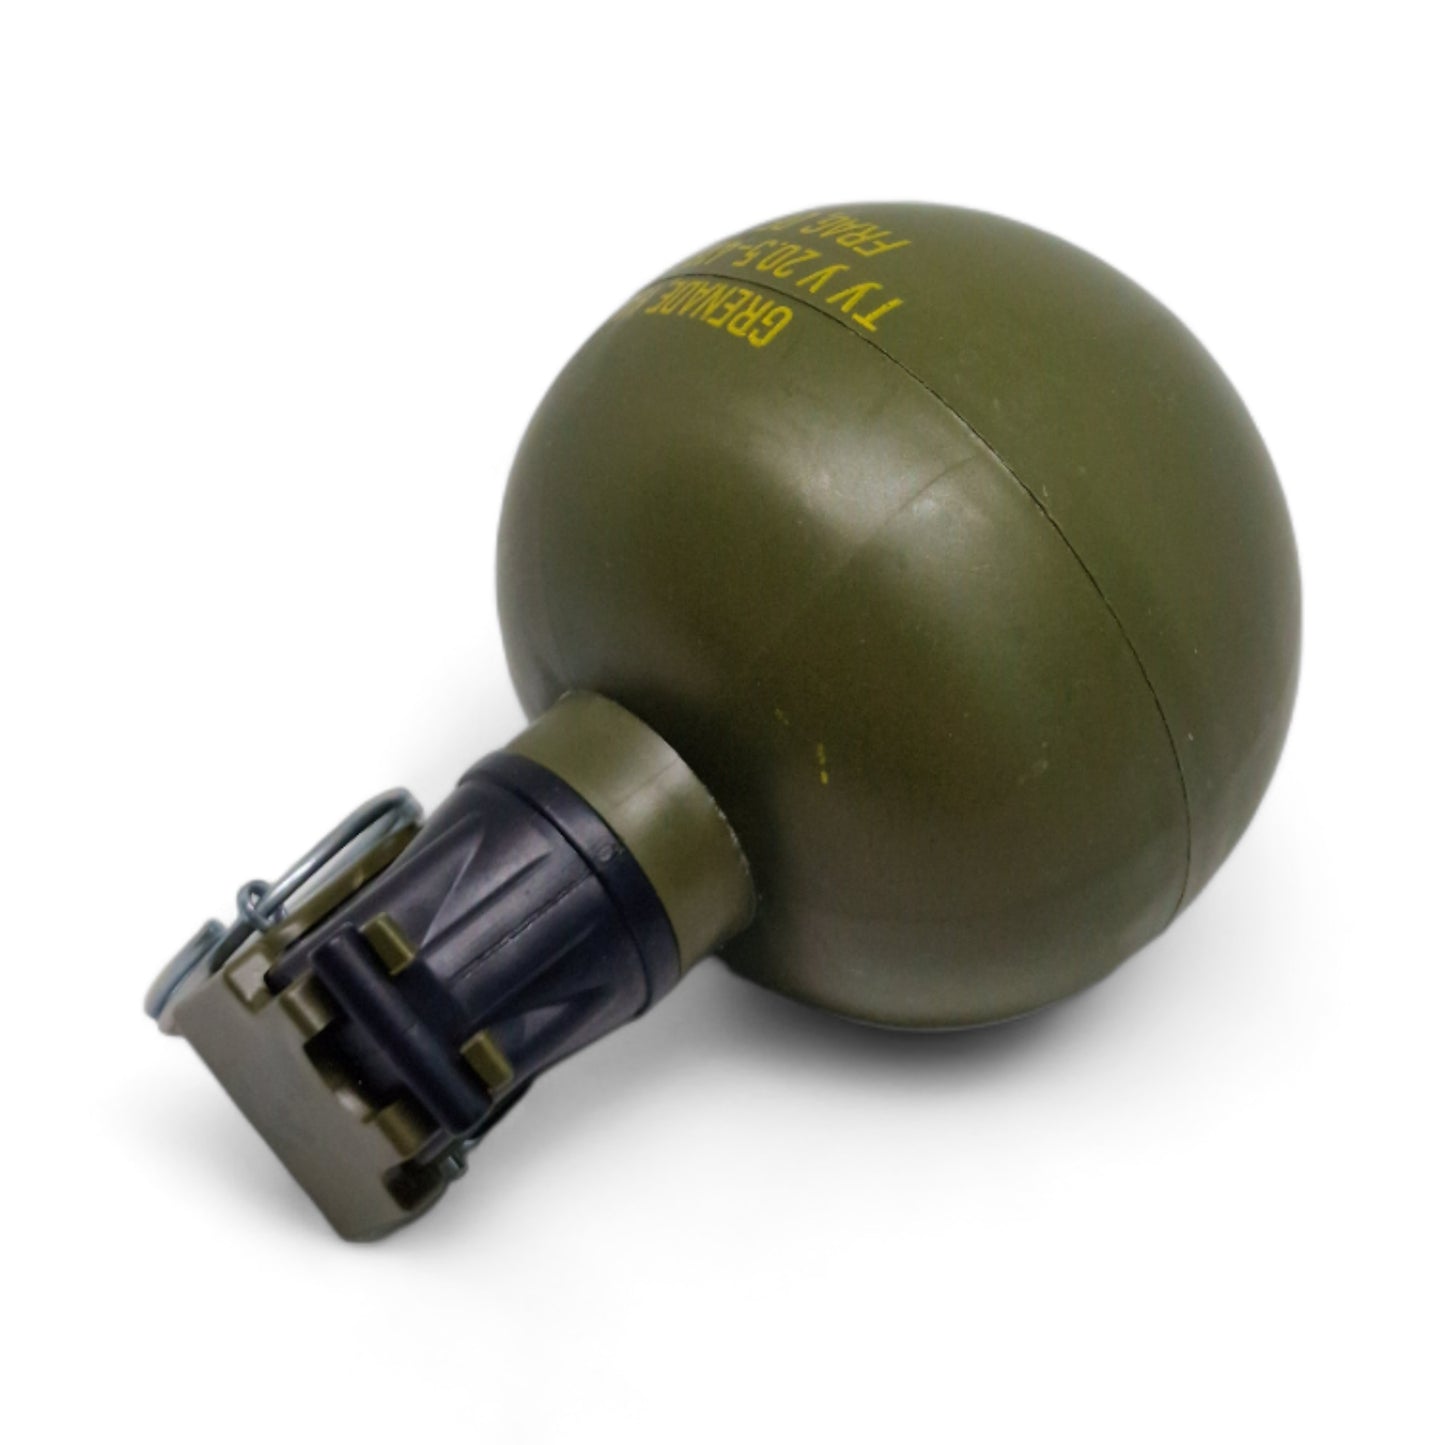 P-67-M NATO AIRSOFT HAND GRENADE (Pack of 10)